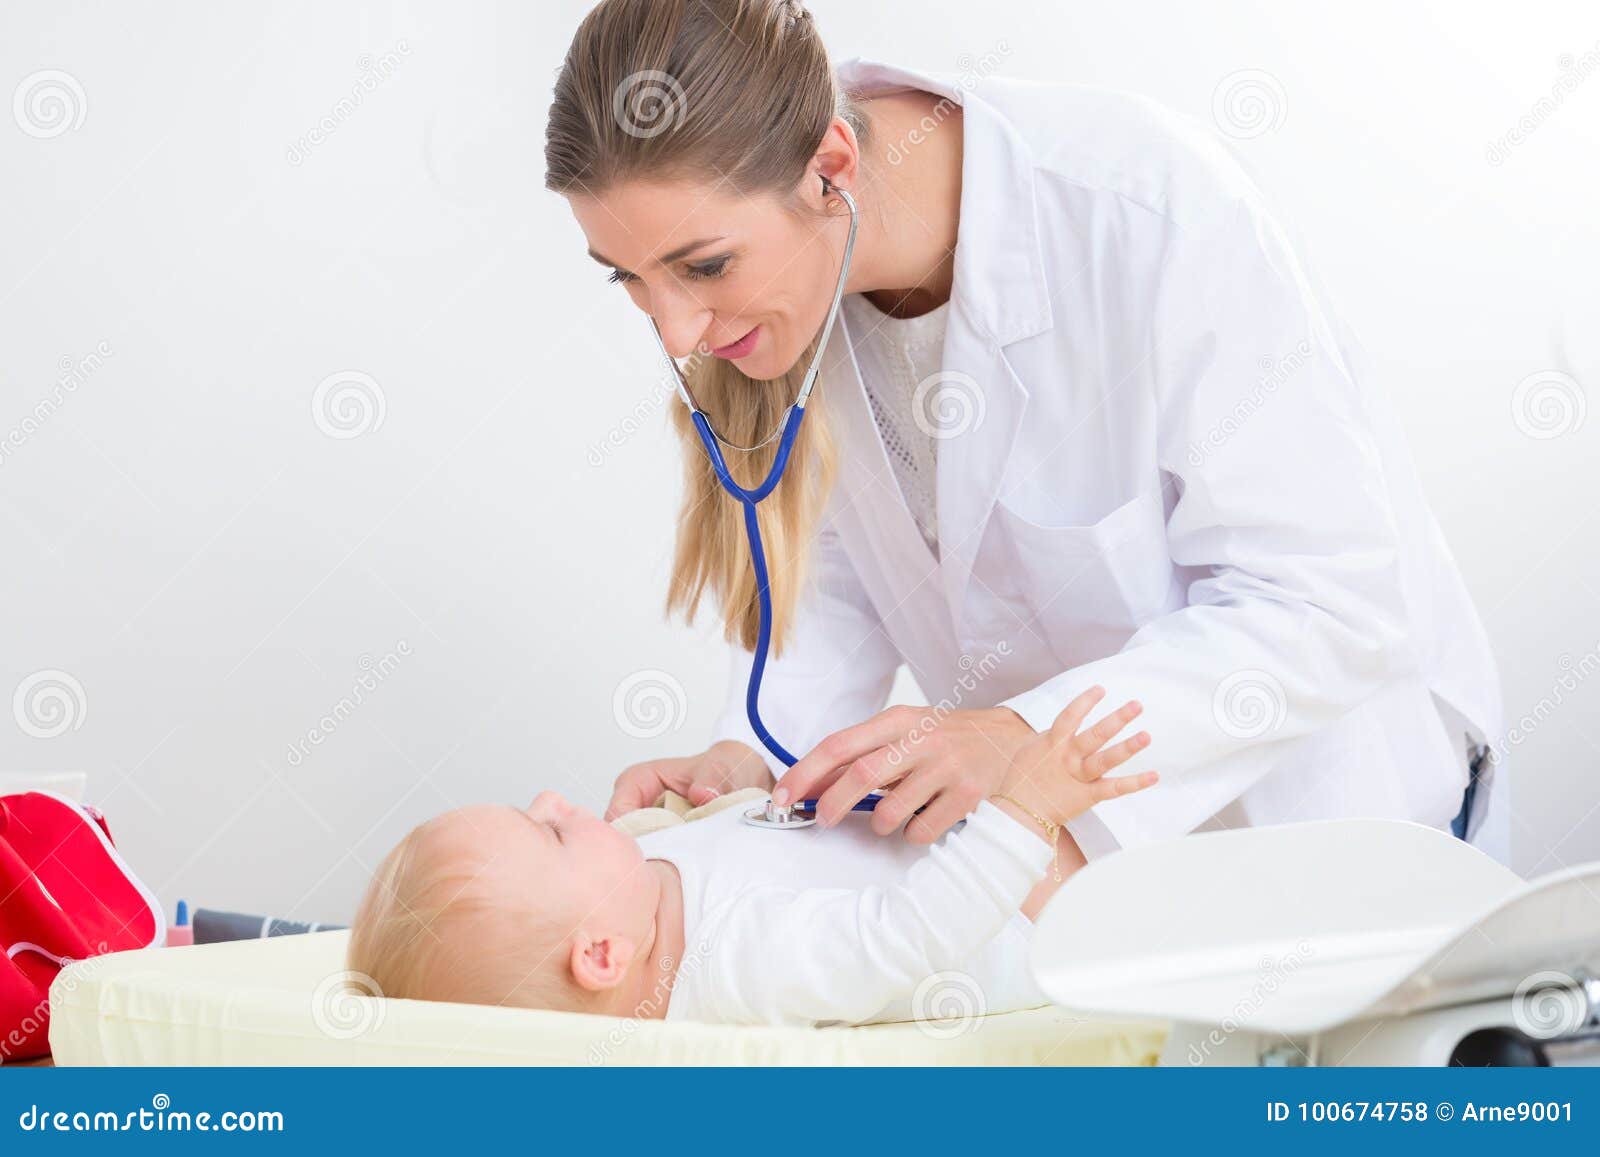 dedicated pediatrician using the stethoscope during the check-up